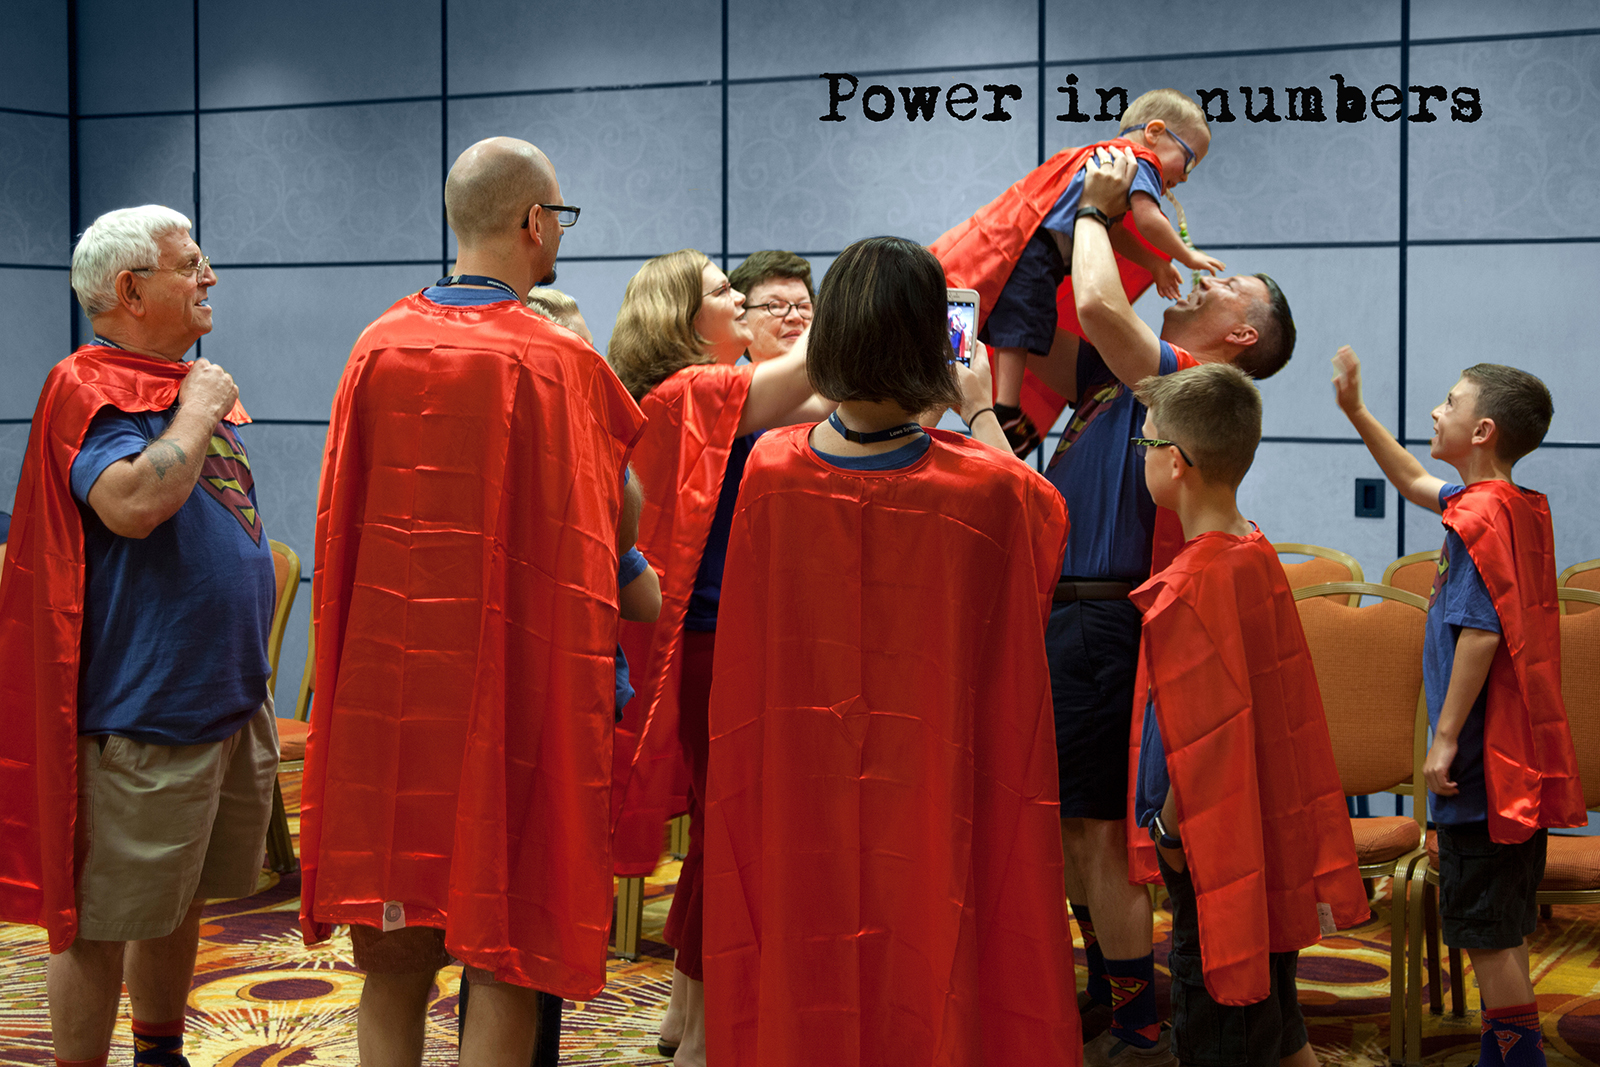 Family wearing Super hero capes lifting up boy in the air